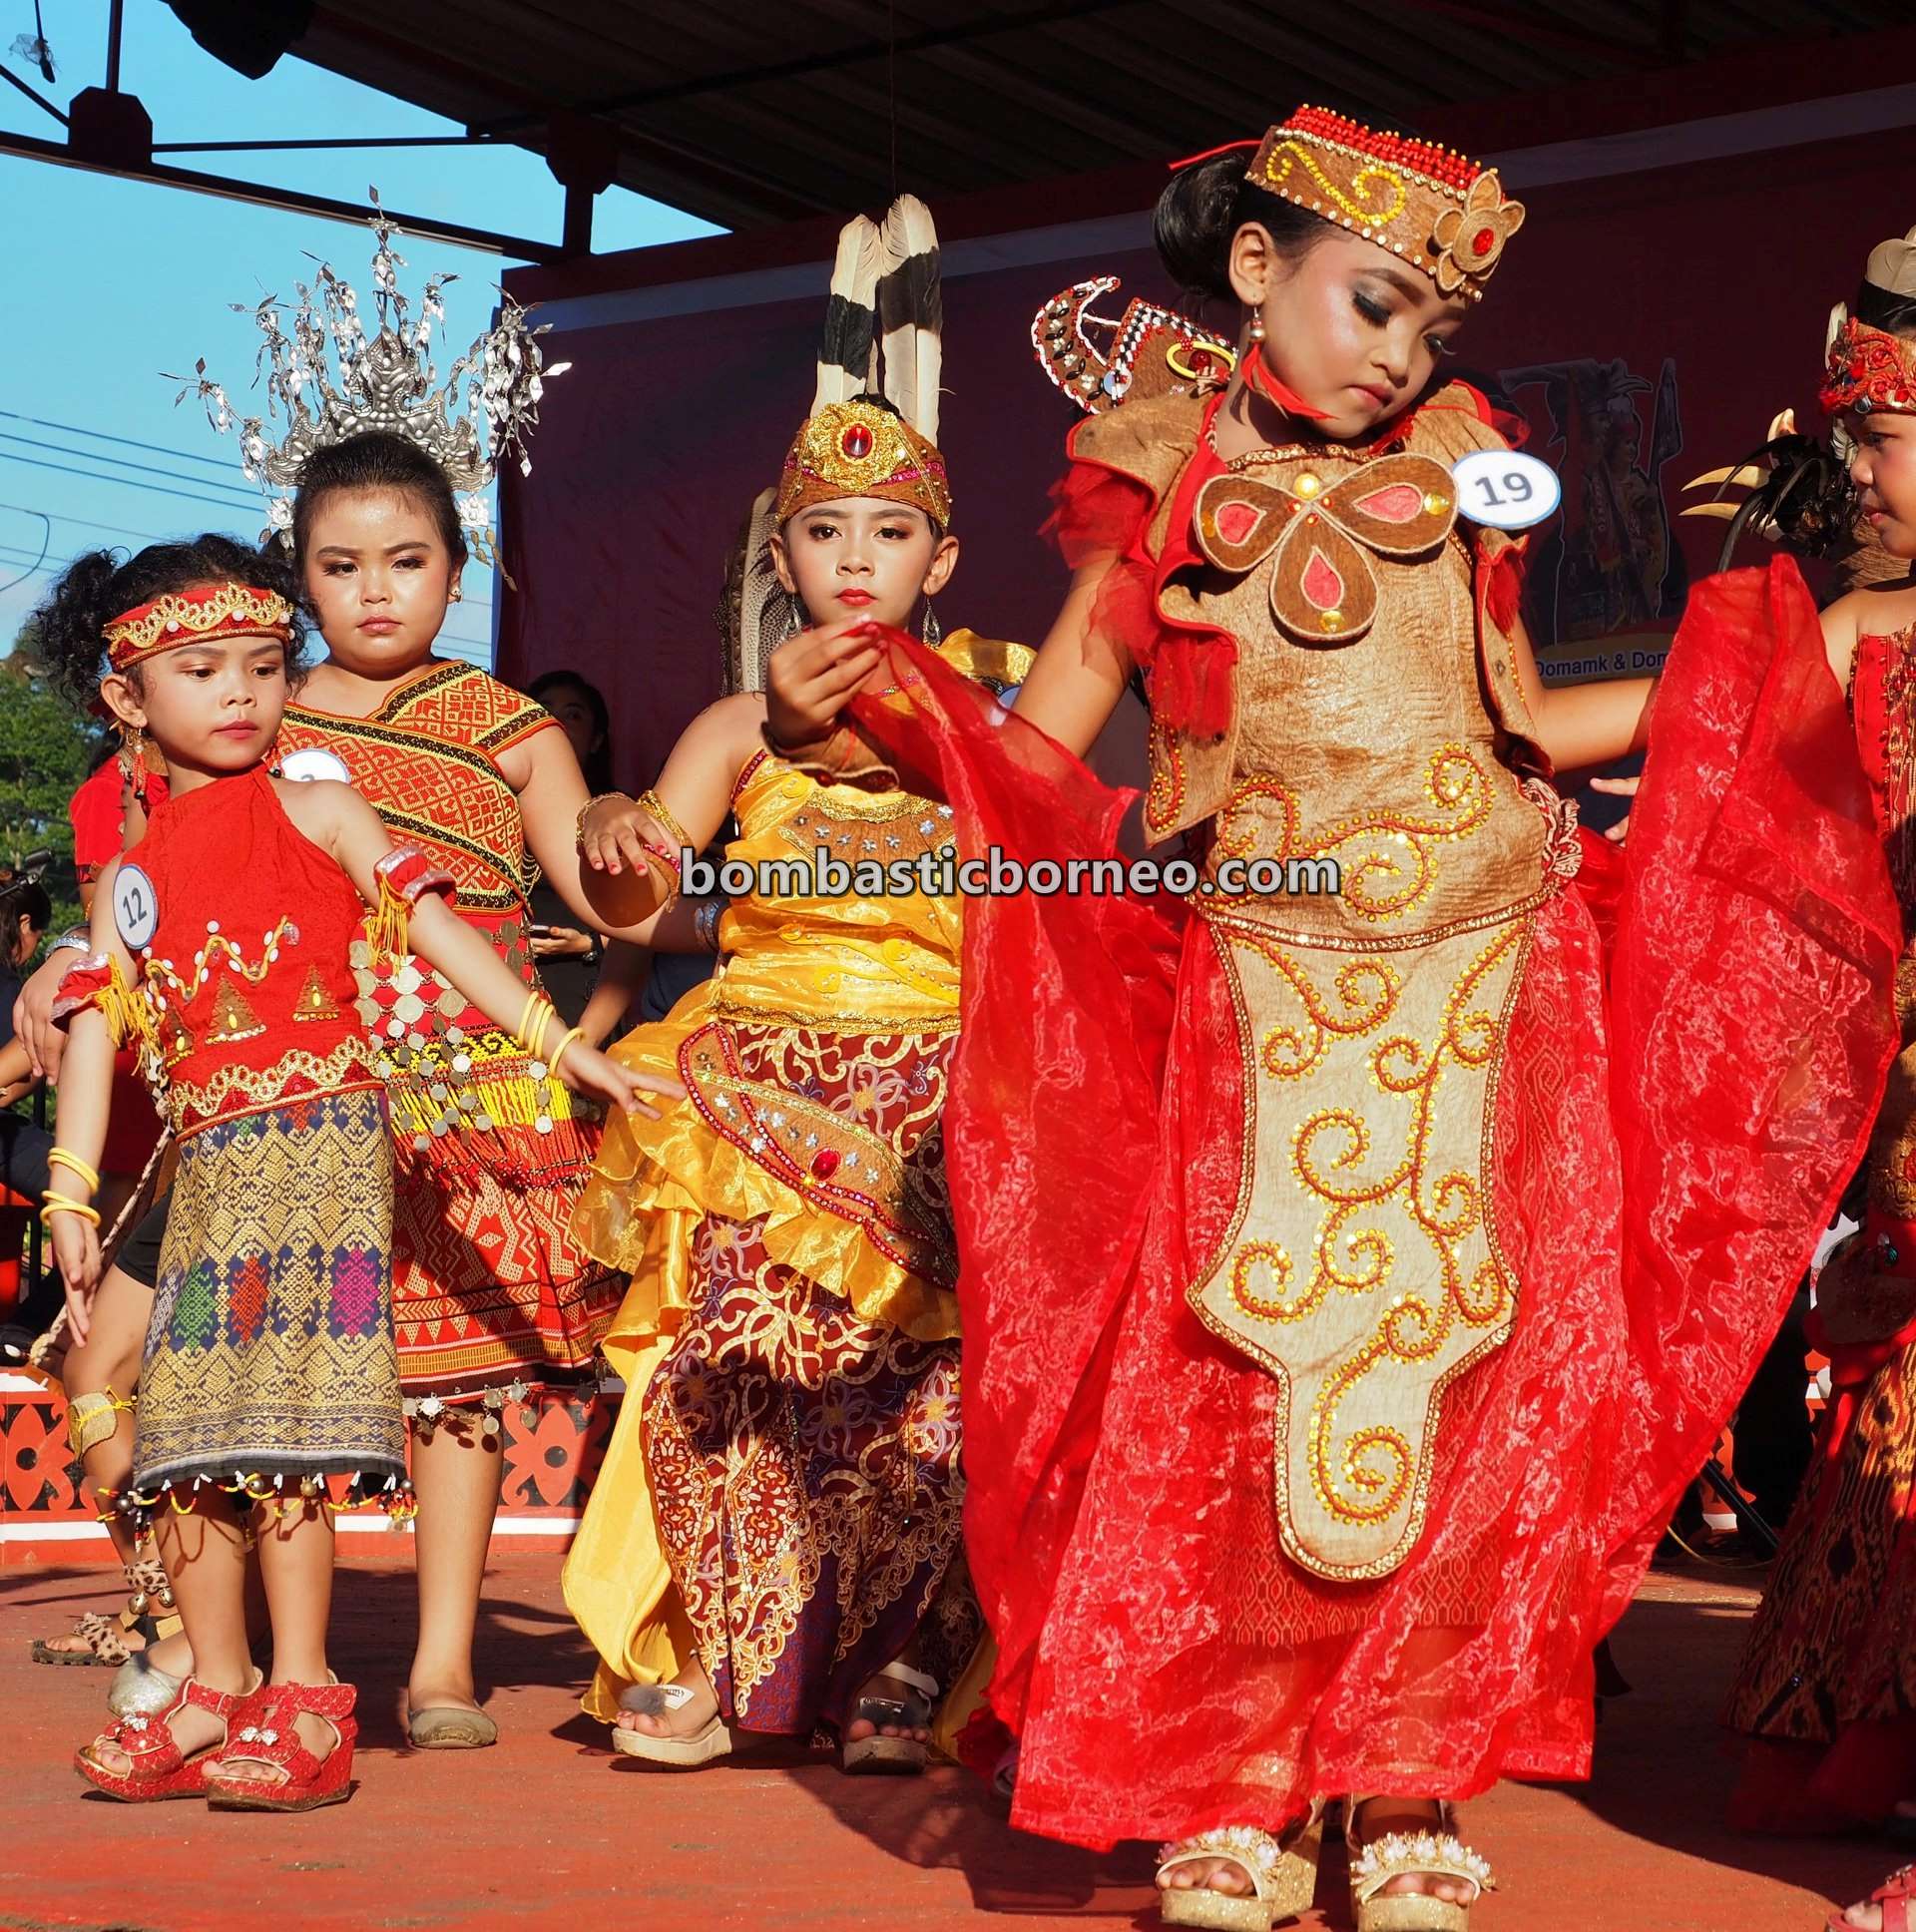 Gawai Dayak Sanggau, Paddy Harvest Festival, authentic, culture, ethnic, indigenous, native, tribe, Indonesia, West Kalimantan, Tourism, tourist attraction, travel guide, Cross Border, Borneo